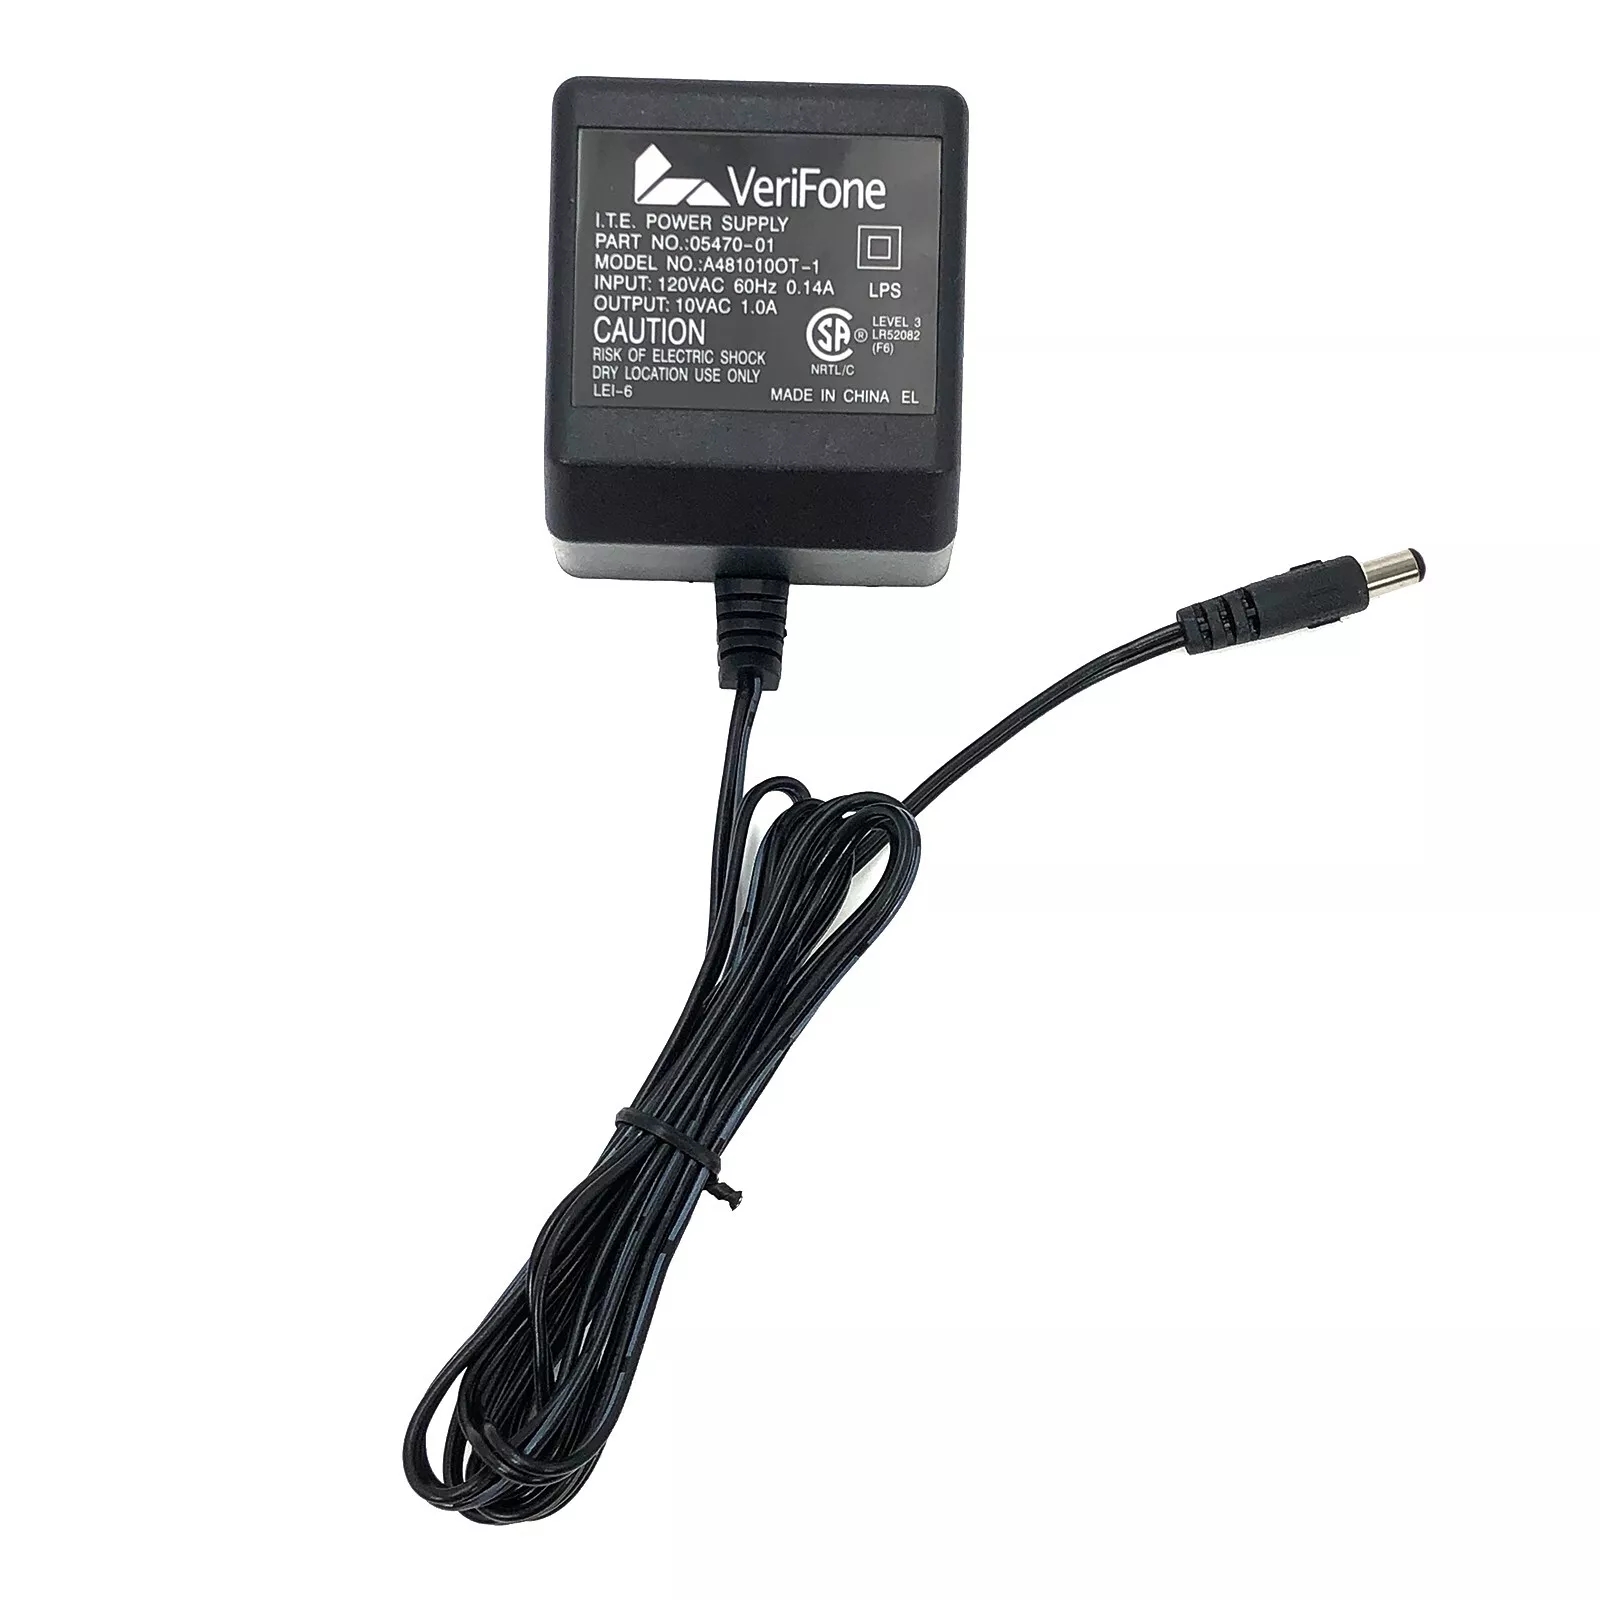 *Brand NEW*Genuine VeriFone A481010OT-1 10V 1A AC/DC Adapter with 5.5x2.1mm Power Supply - Click Image to Close